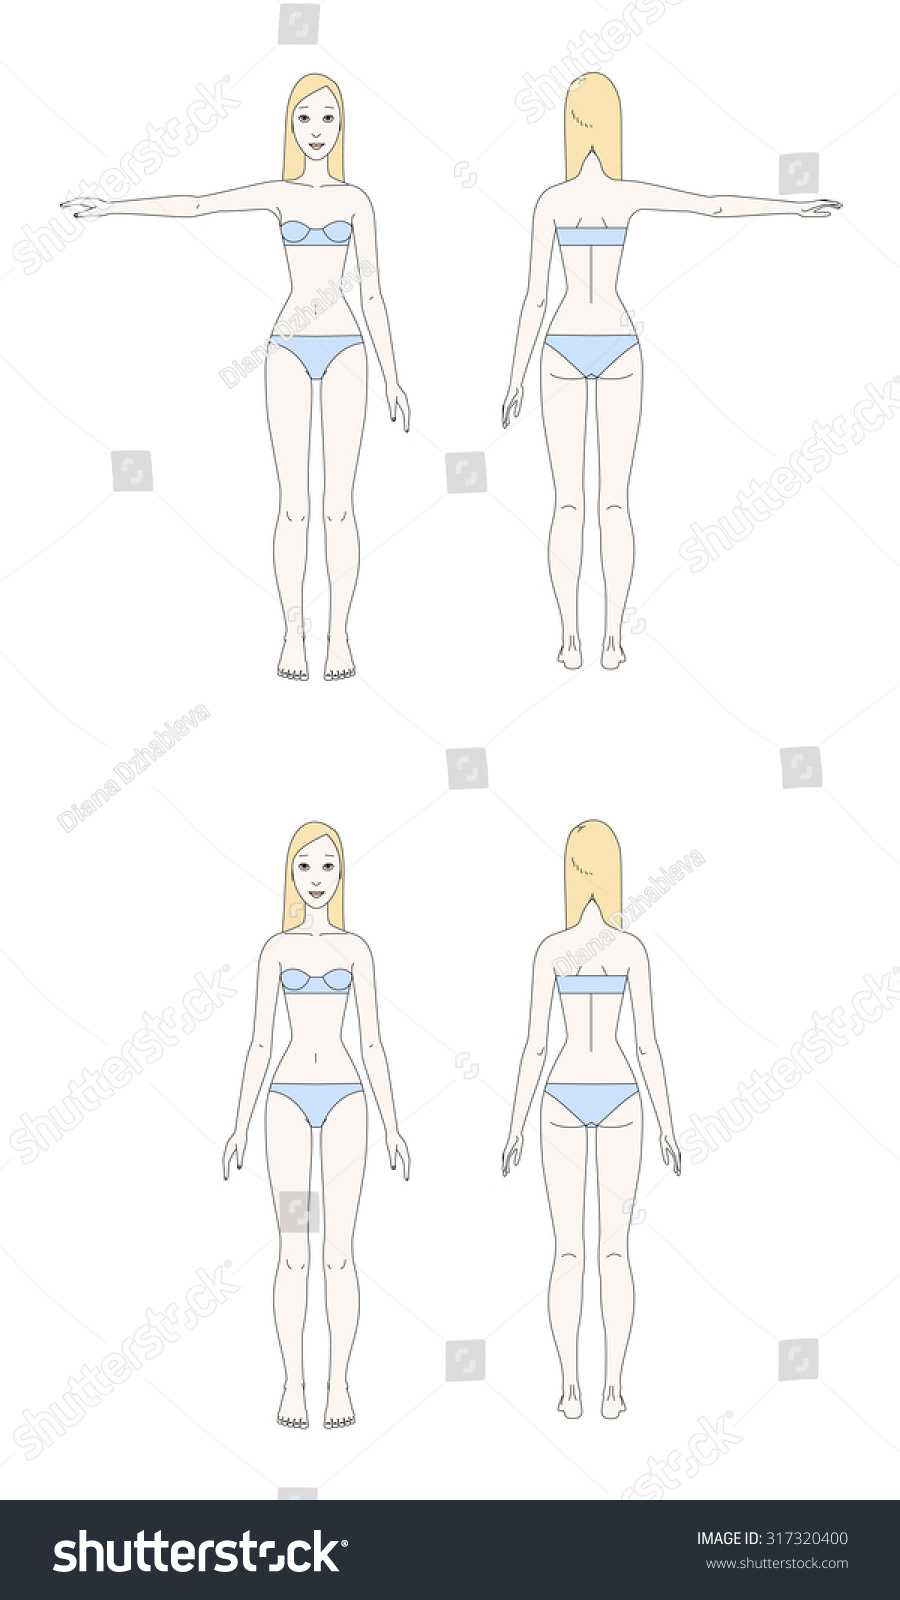 Triggerfingerstitching.blogspot: Female Body Template In Blank Body Map Template